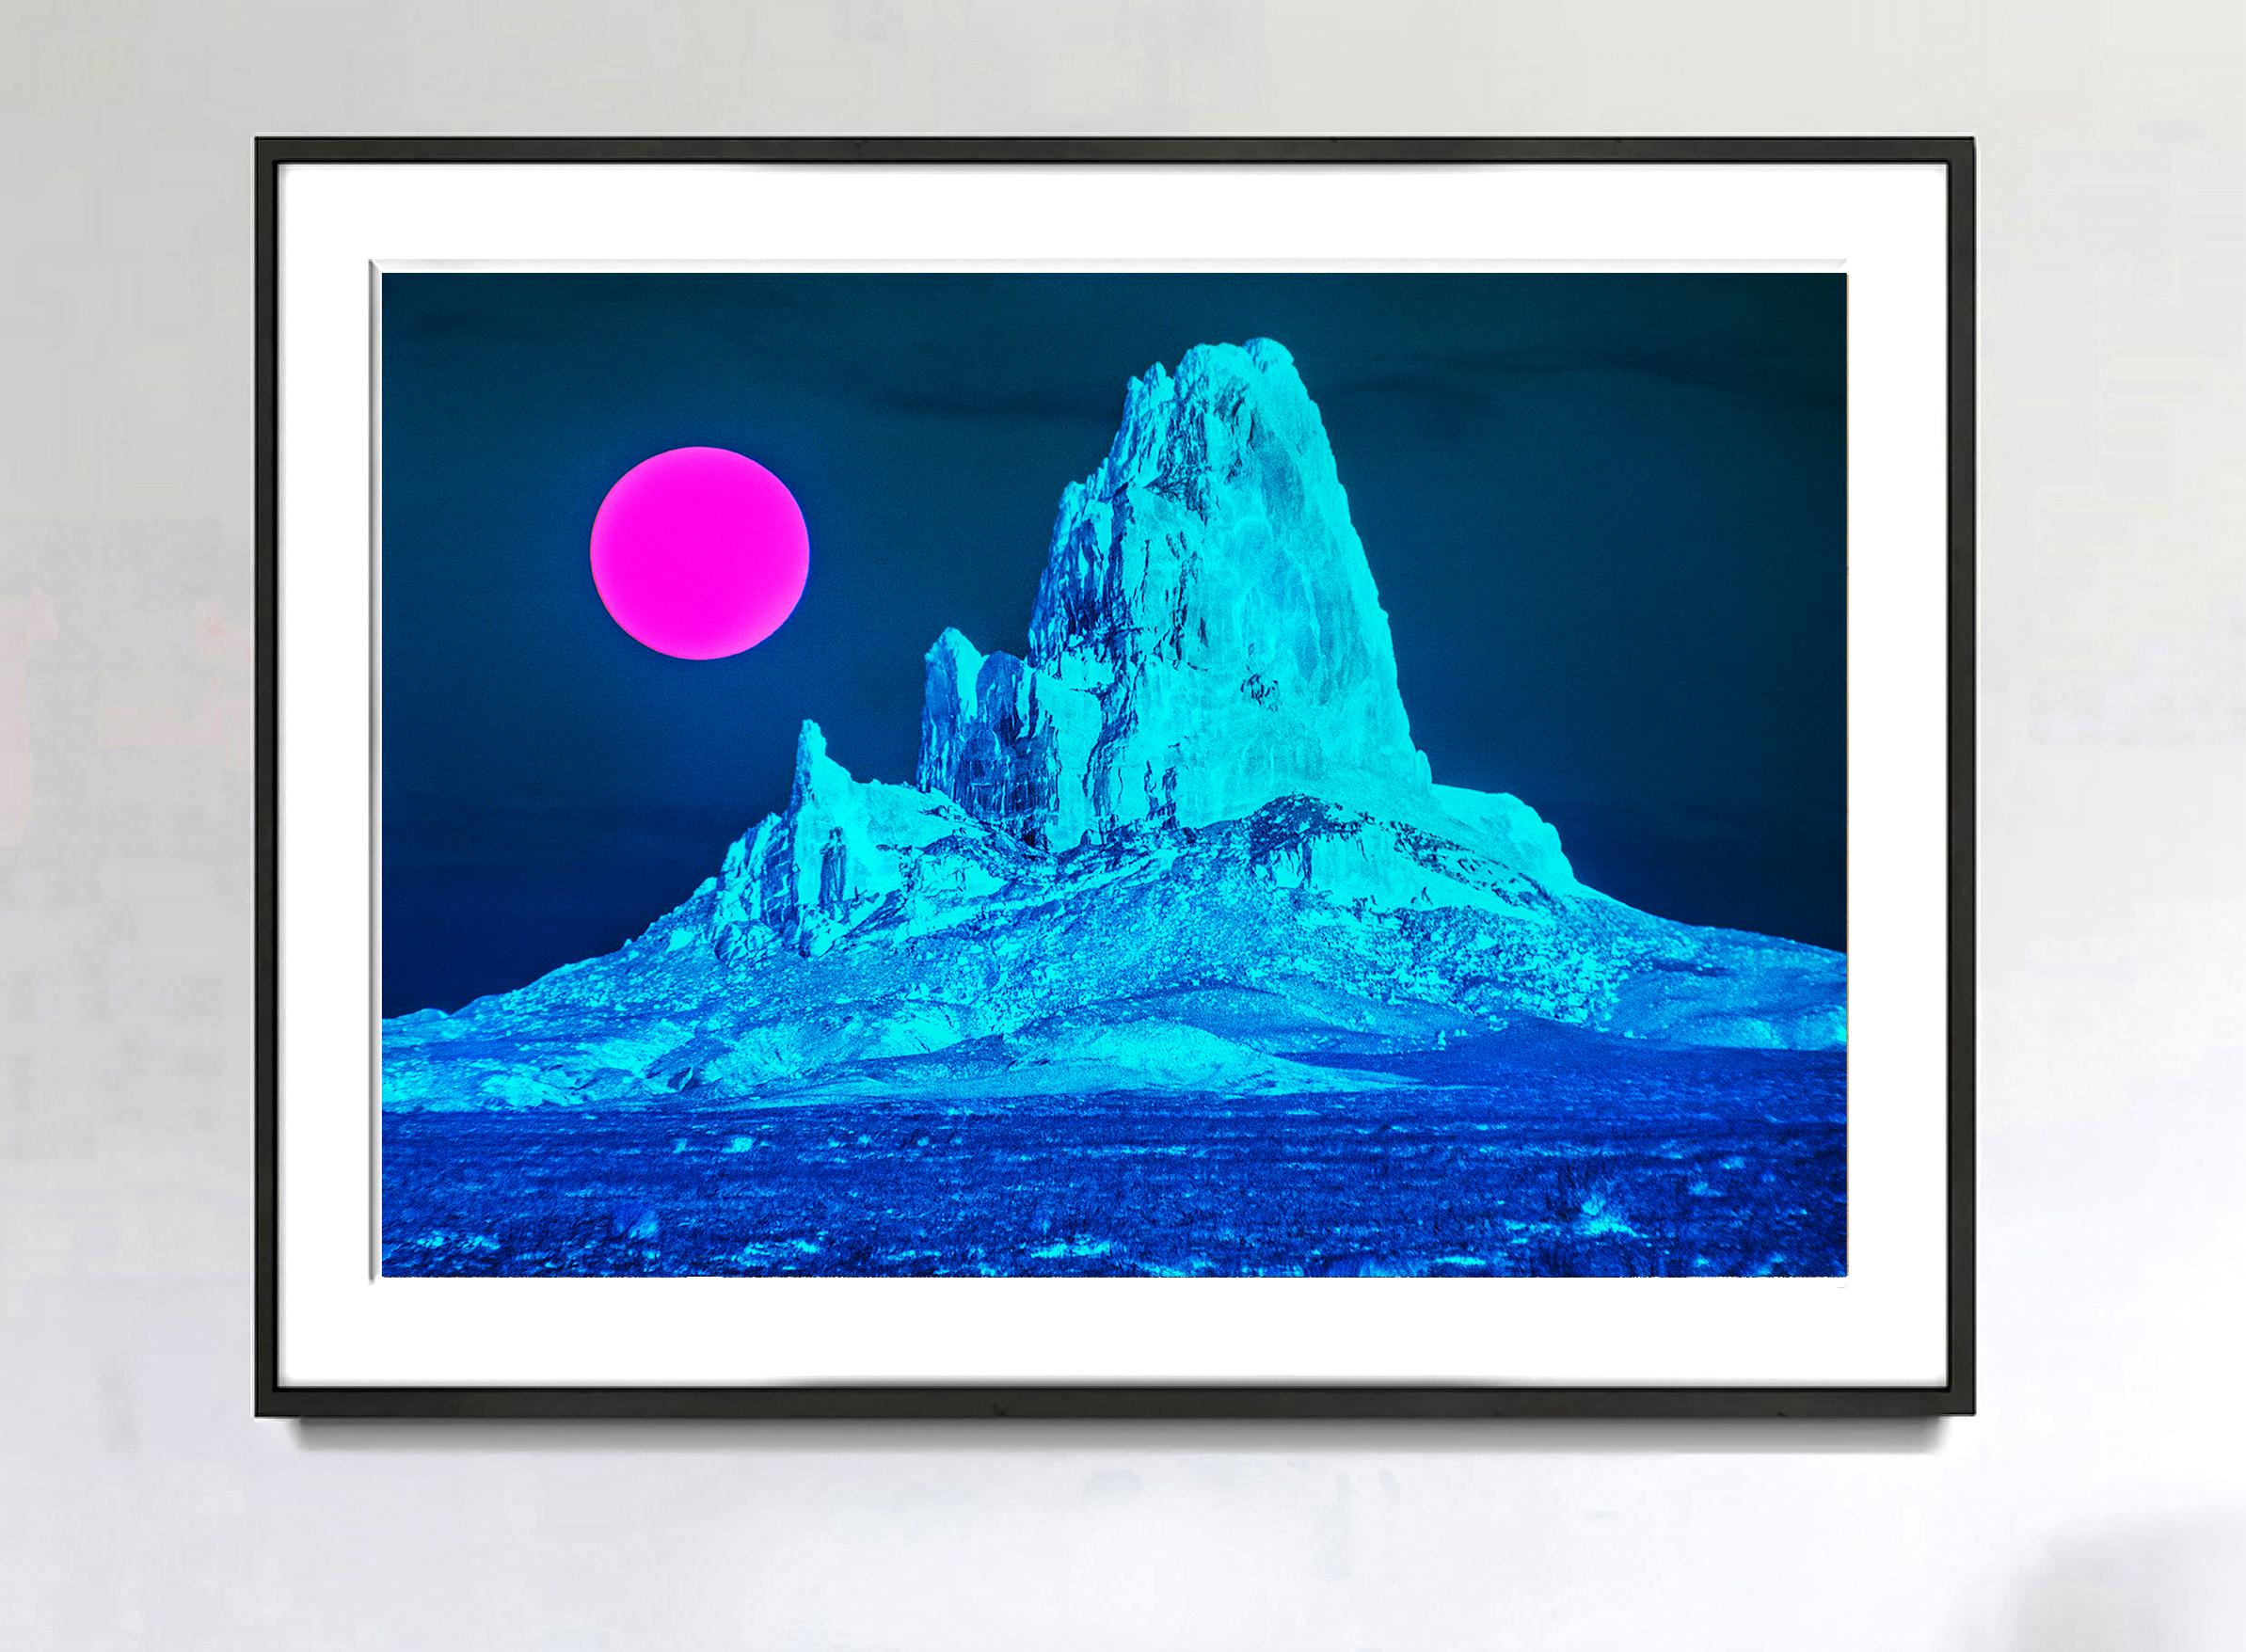 Surreal Desert Landscape with Blue Mountain and Magenta Moon - Monument Valley  - Photograph by Mitchell Funk